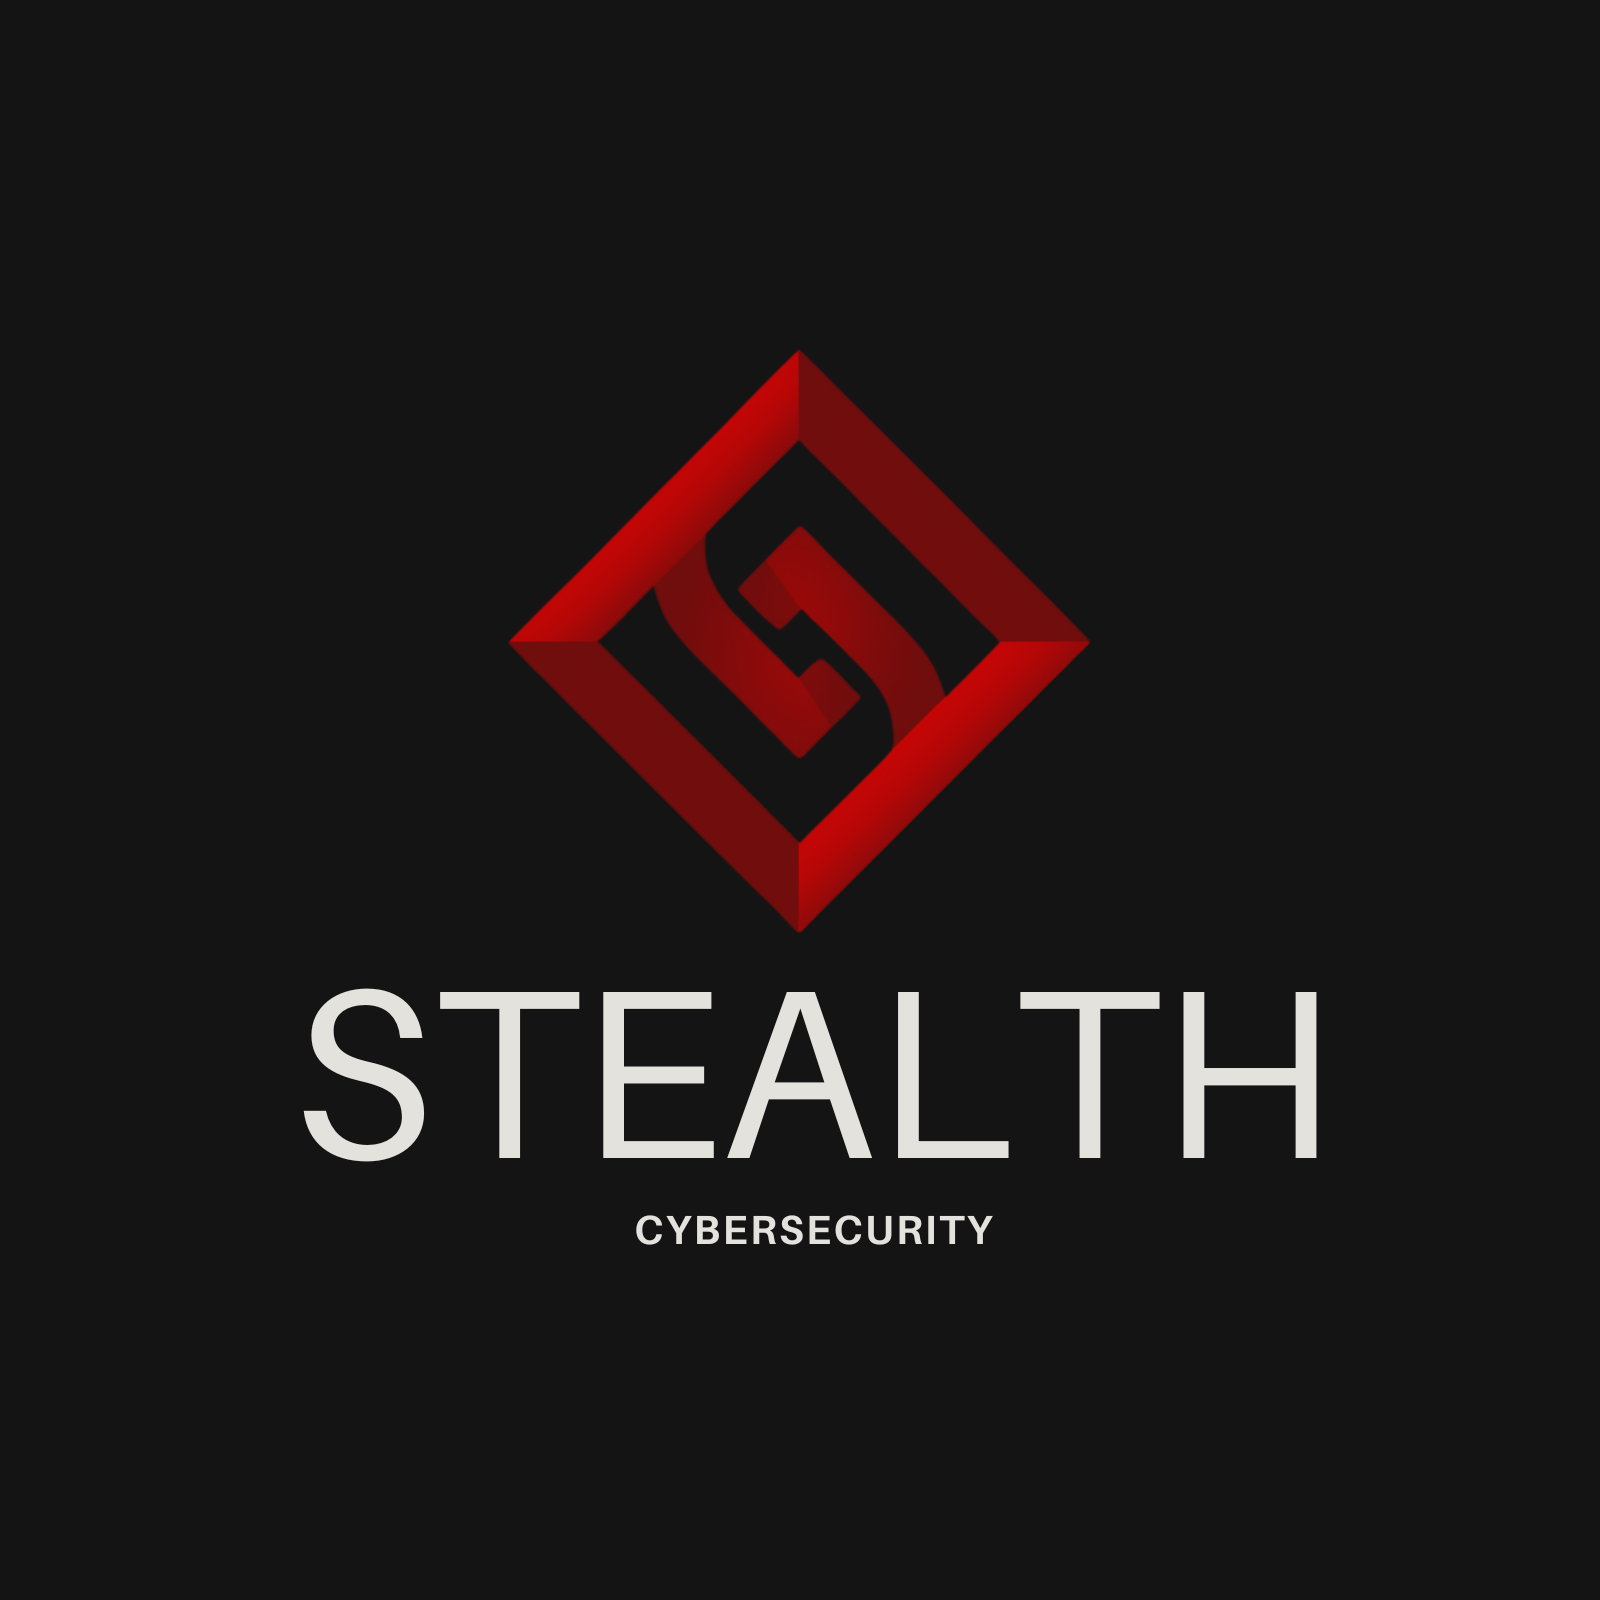 Stealth Cybersecurity Logo Design